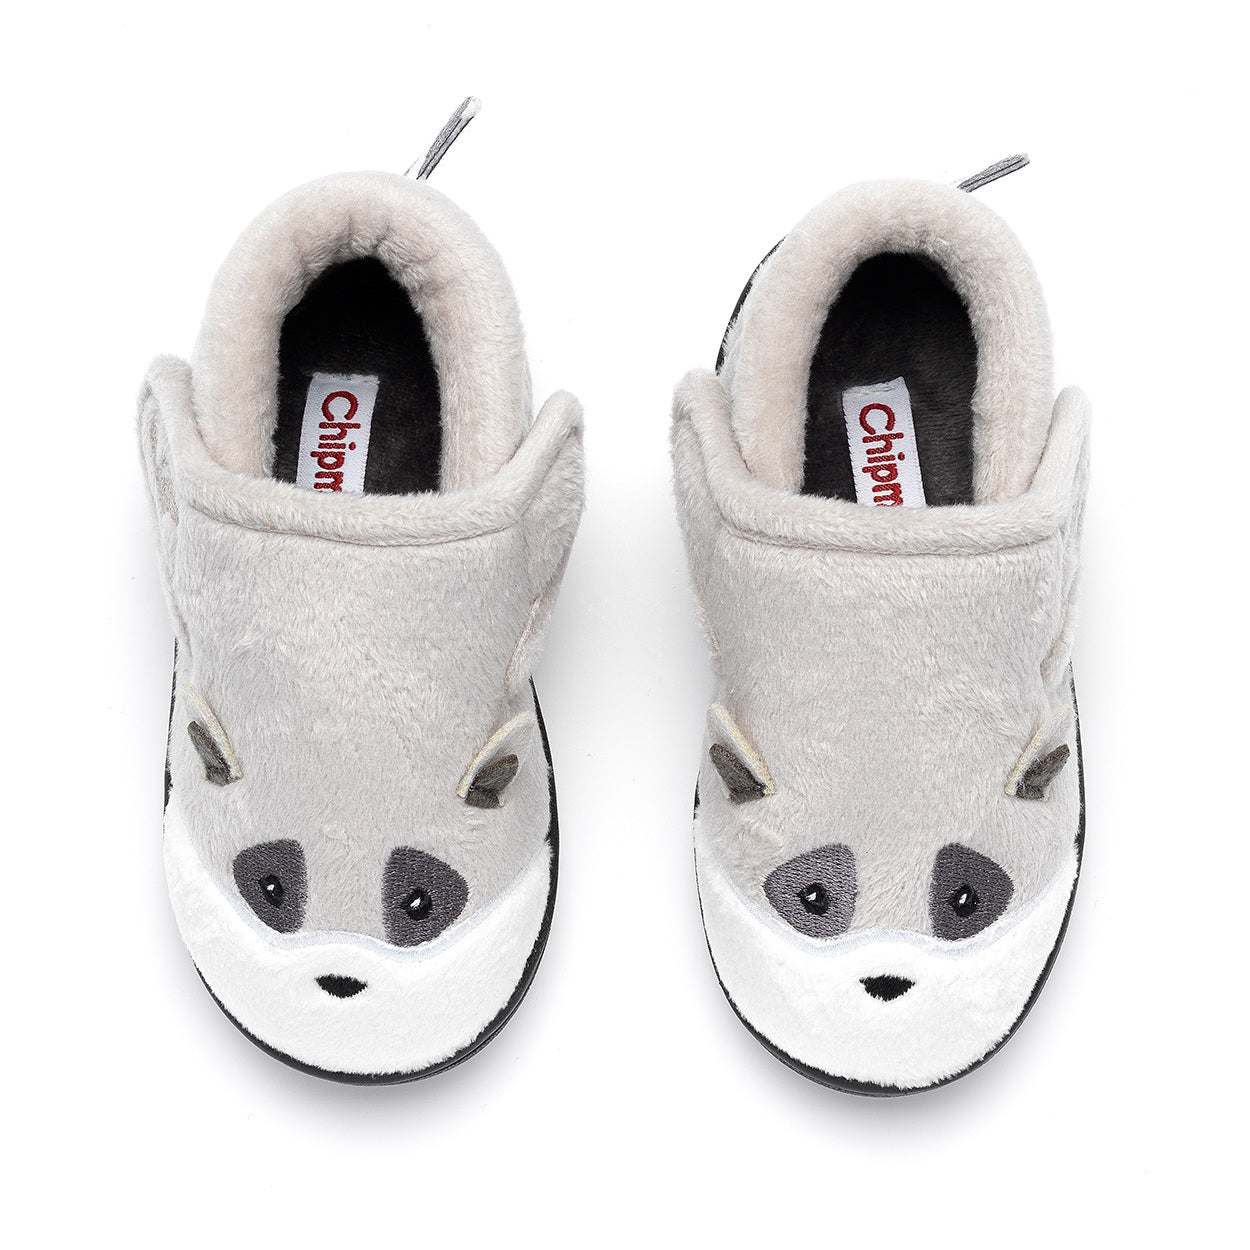 A pair of unisex slippers by Chipmunks, style Rocco Racoon, in grey racoon design with velcro fastening. View from above.